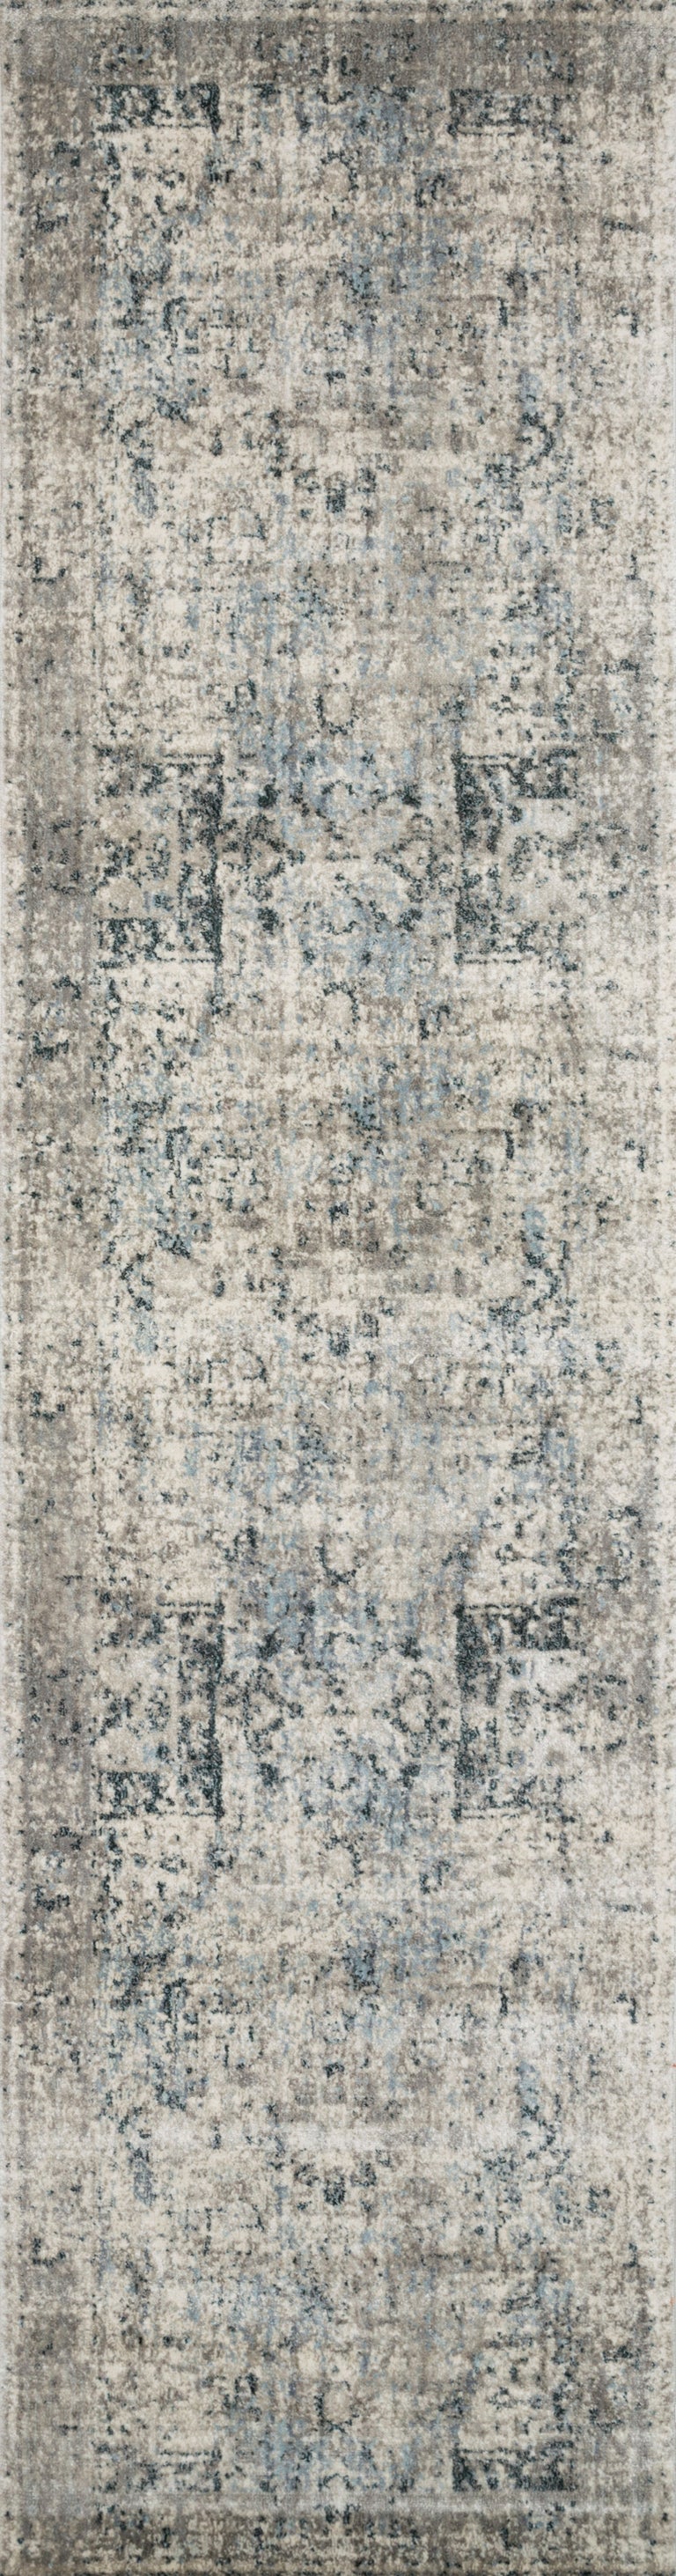 Loloi Rugs Anastasia Collection Rug in Blue, Slate - 9'6" x 9'6"